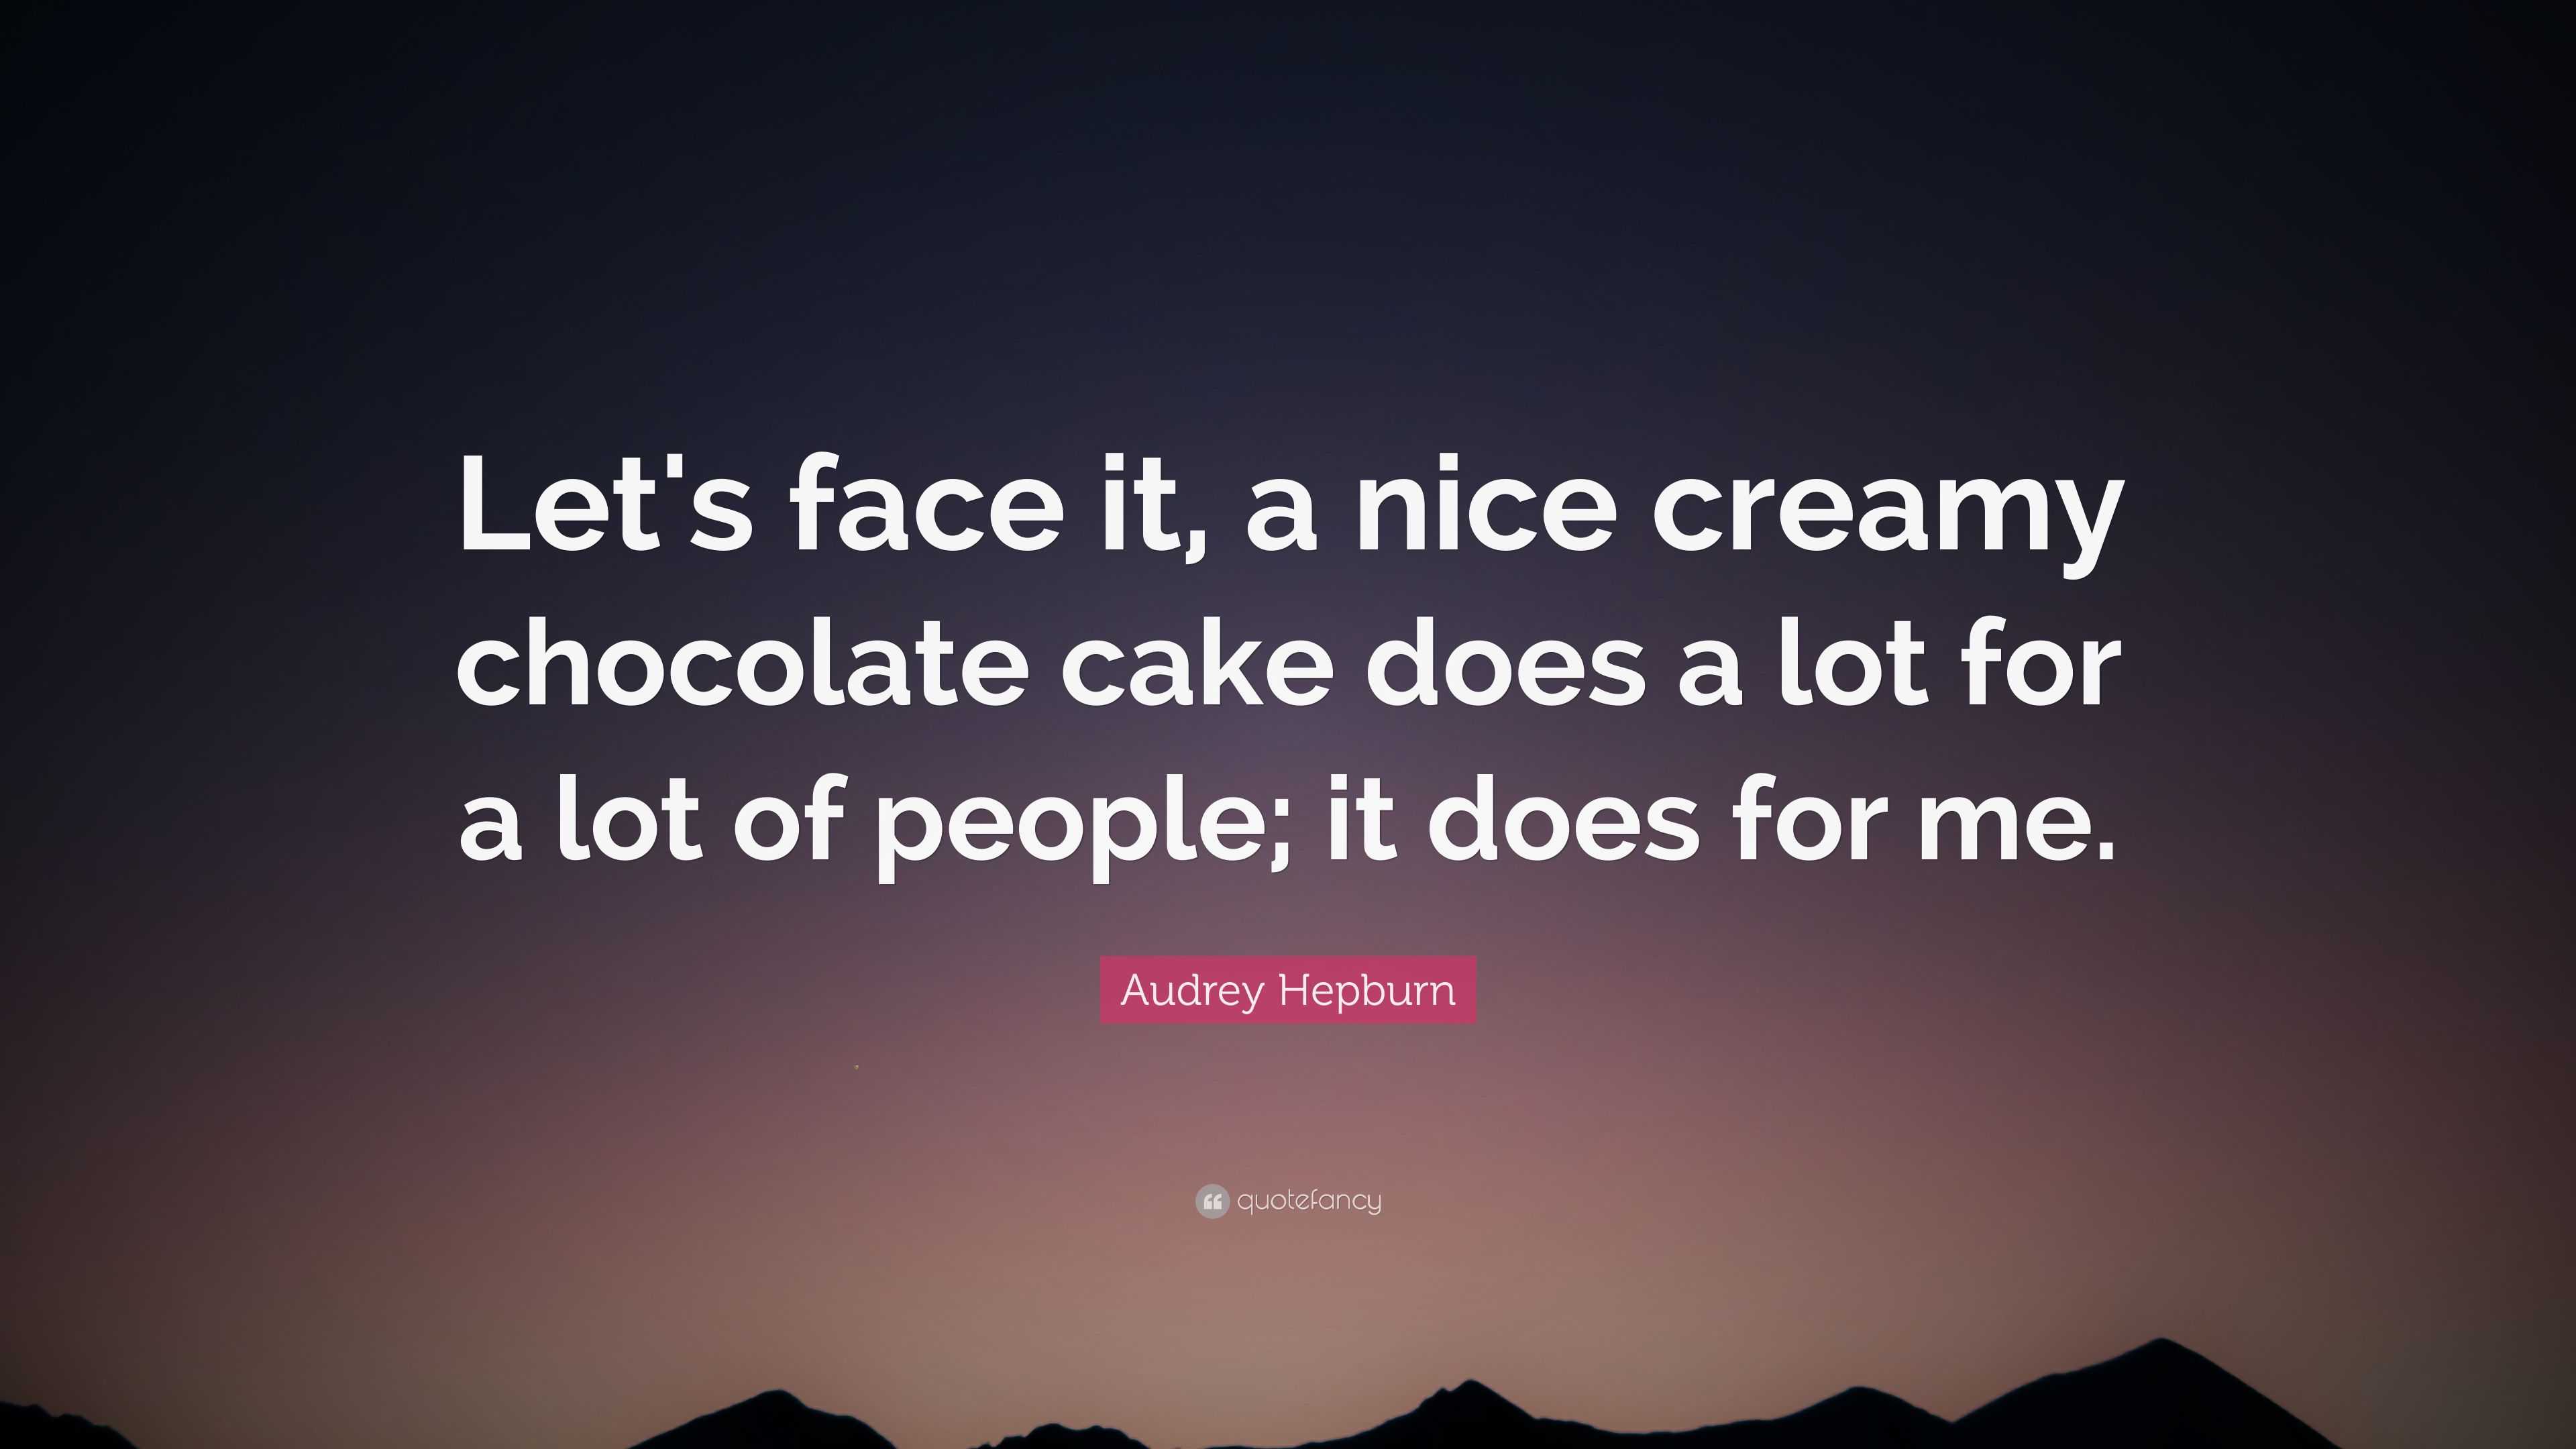 Audrey Hepburn Quote: “Let's face it, a nice creamy chocolate cake does ...